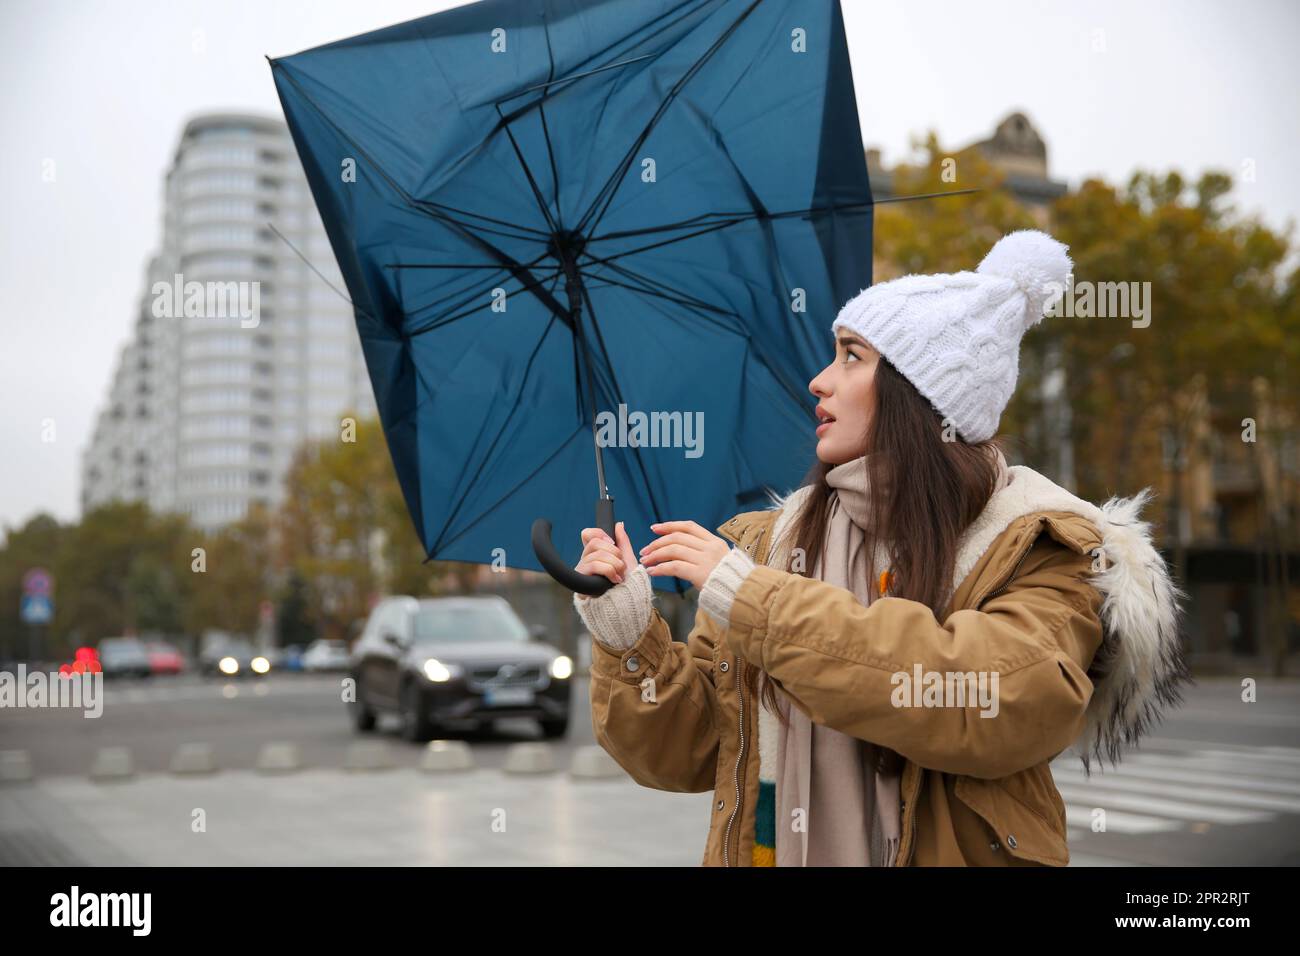 Woman with blue umbrella caught in gust of wind on street Stock Photo